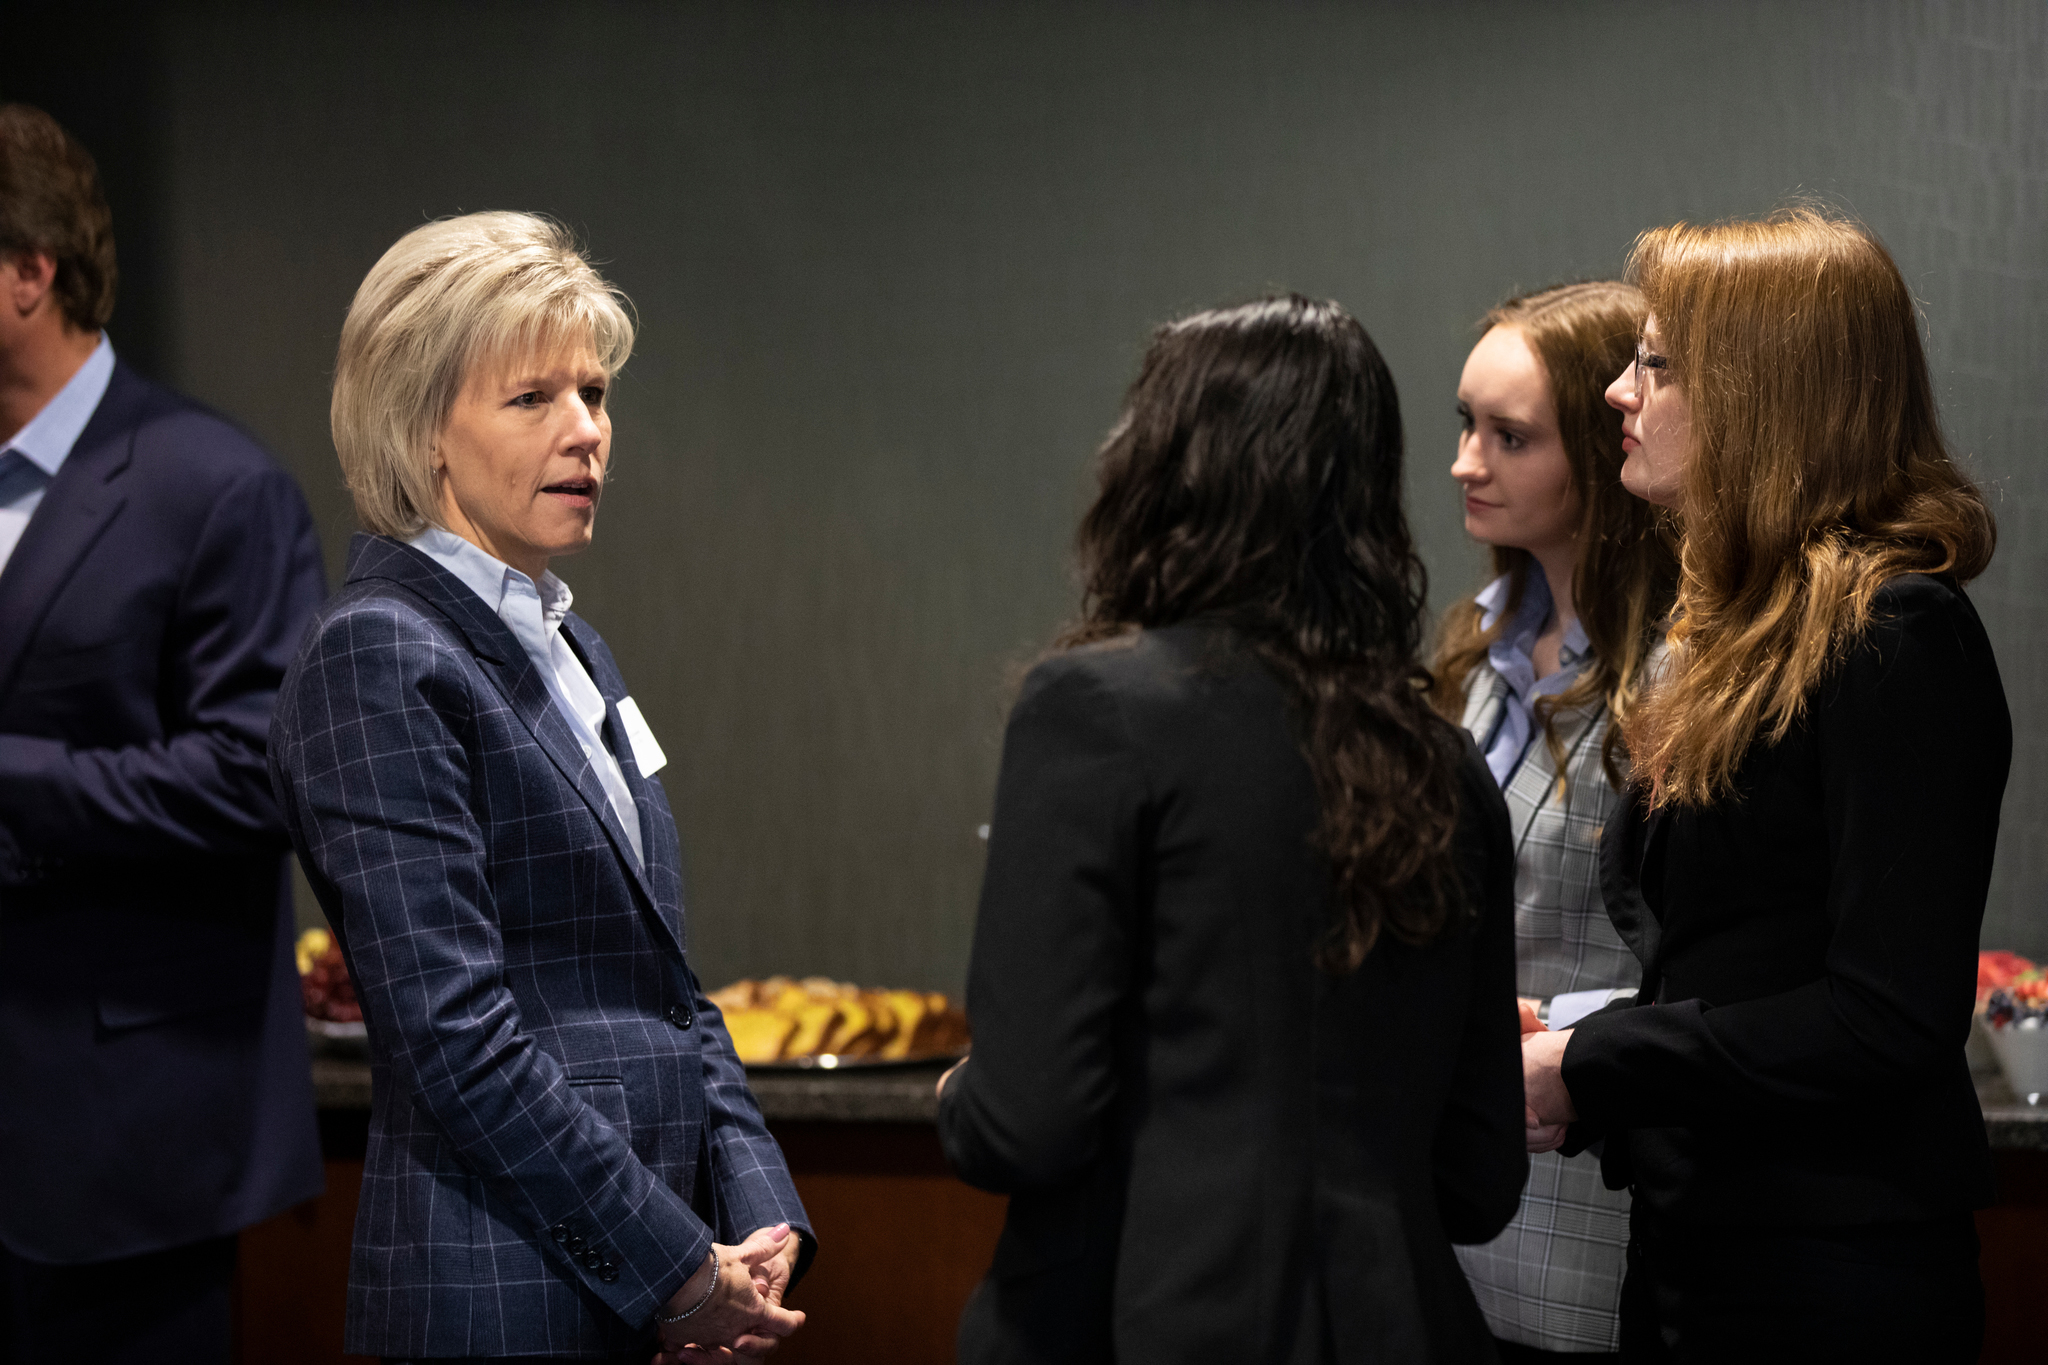 Deb Schoneman, President of Piper Jaffray, speaks with students during the GHR Fellows Advisory Council meeting in the Iversen Hearth Room in the Anderson Student Center on November 15, 2019, in St. Paul.